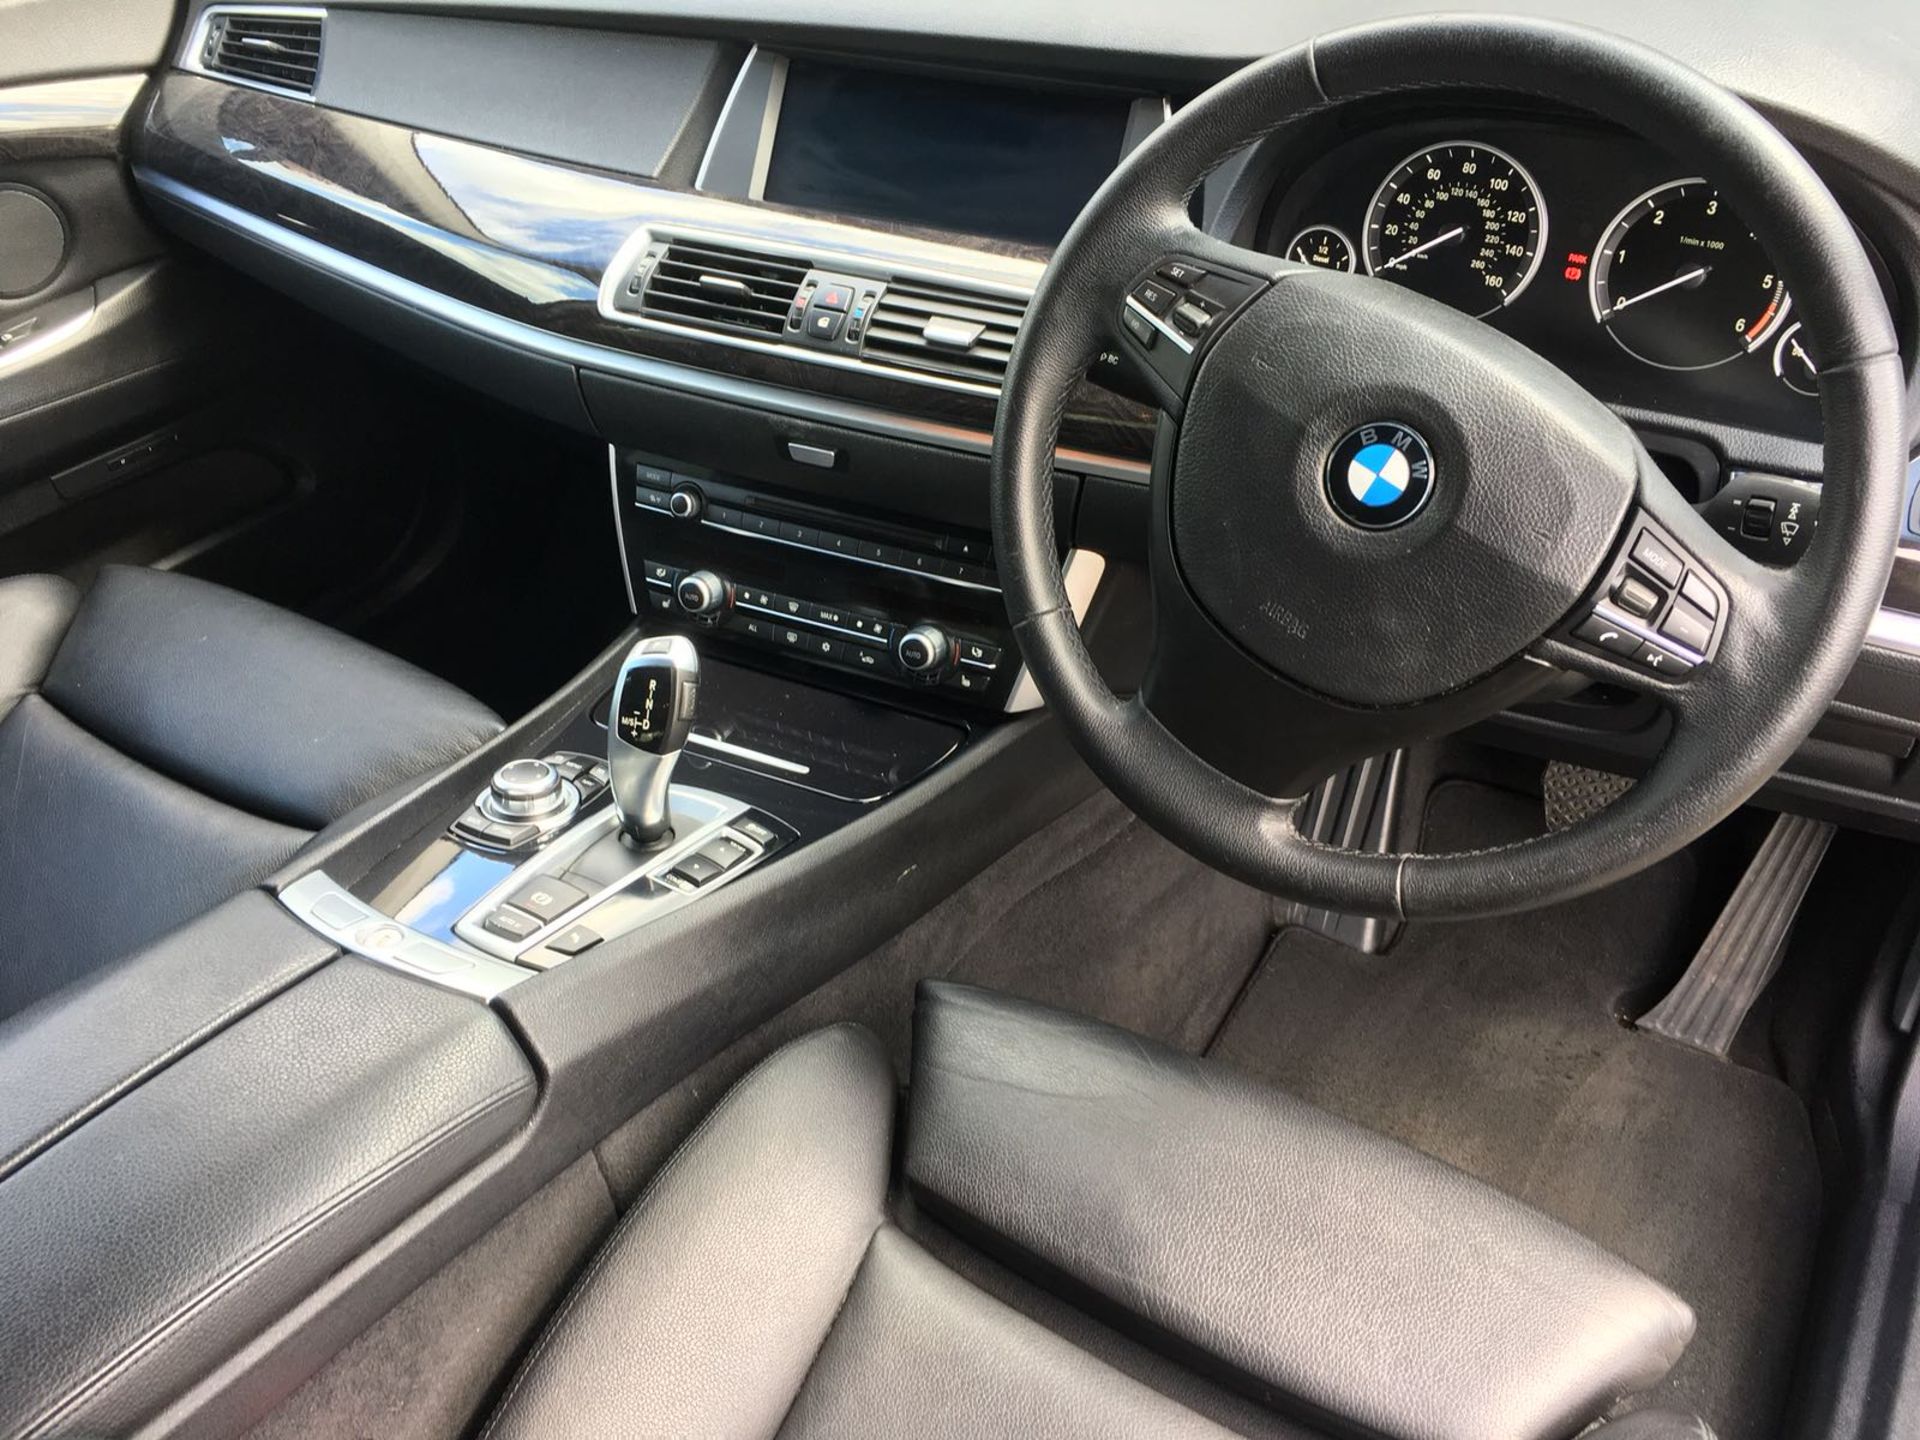 BMW 535D GT Gran Turismo 2012/12. 57,000 Miles. Automatic Gearbox - Image 14 of 19